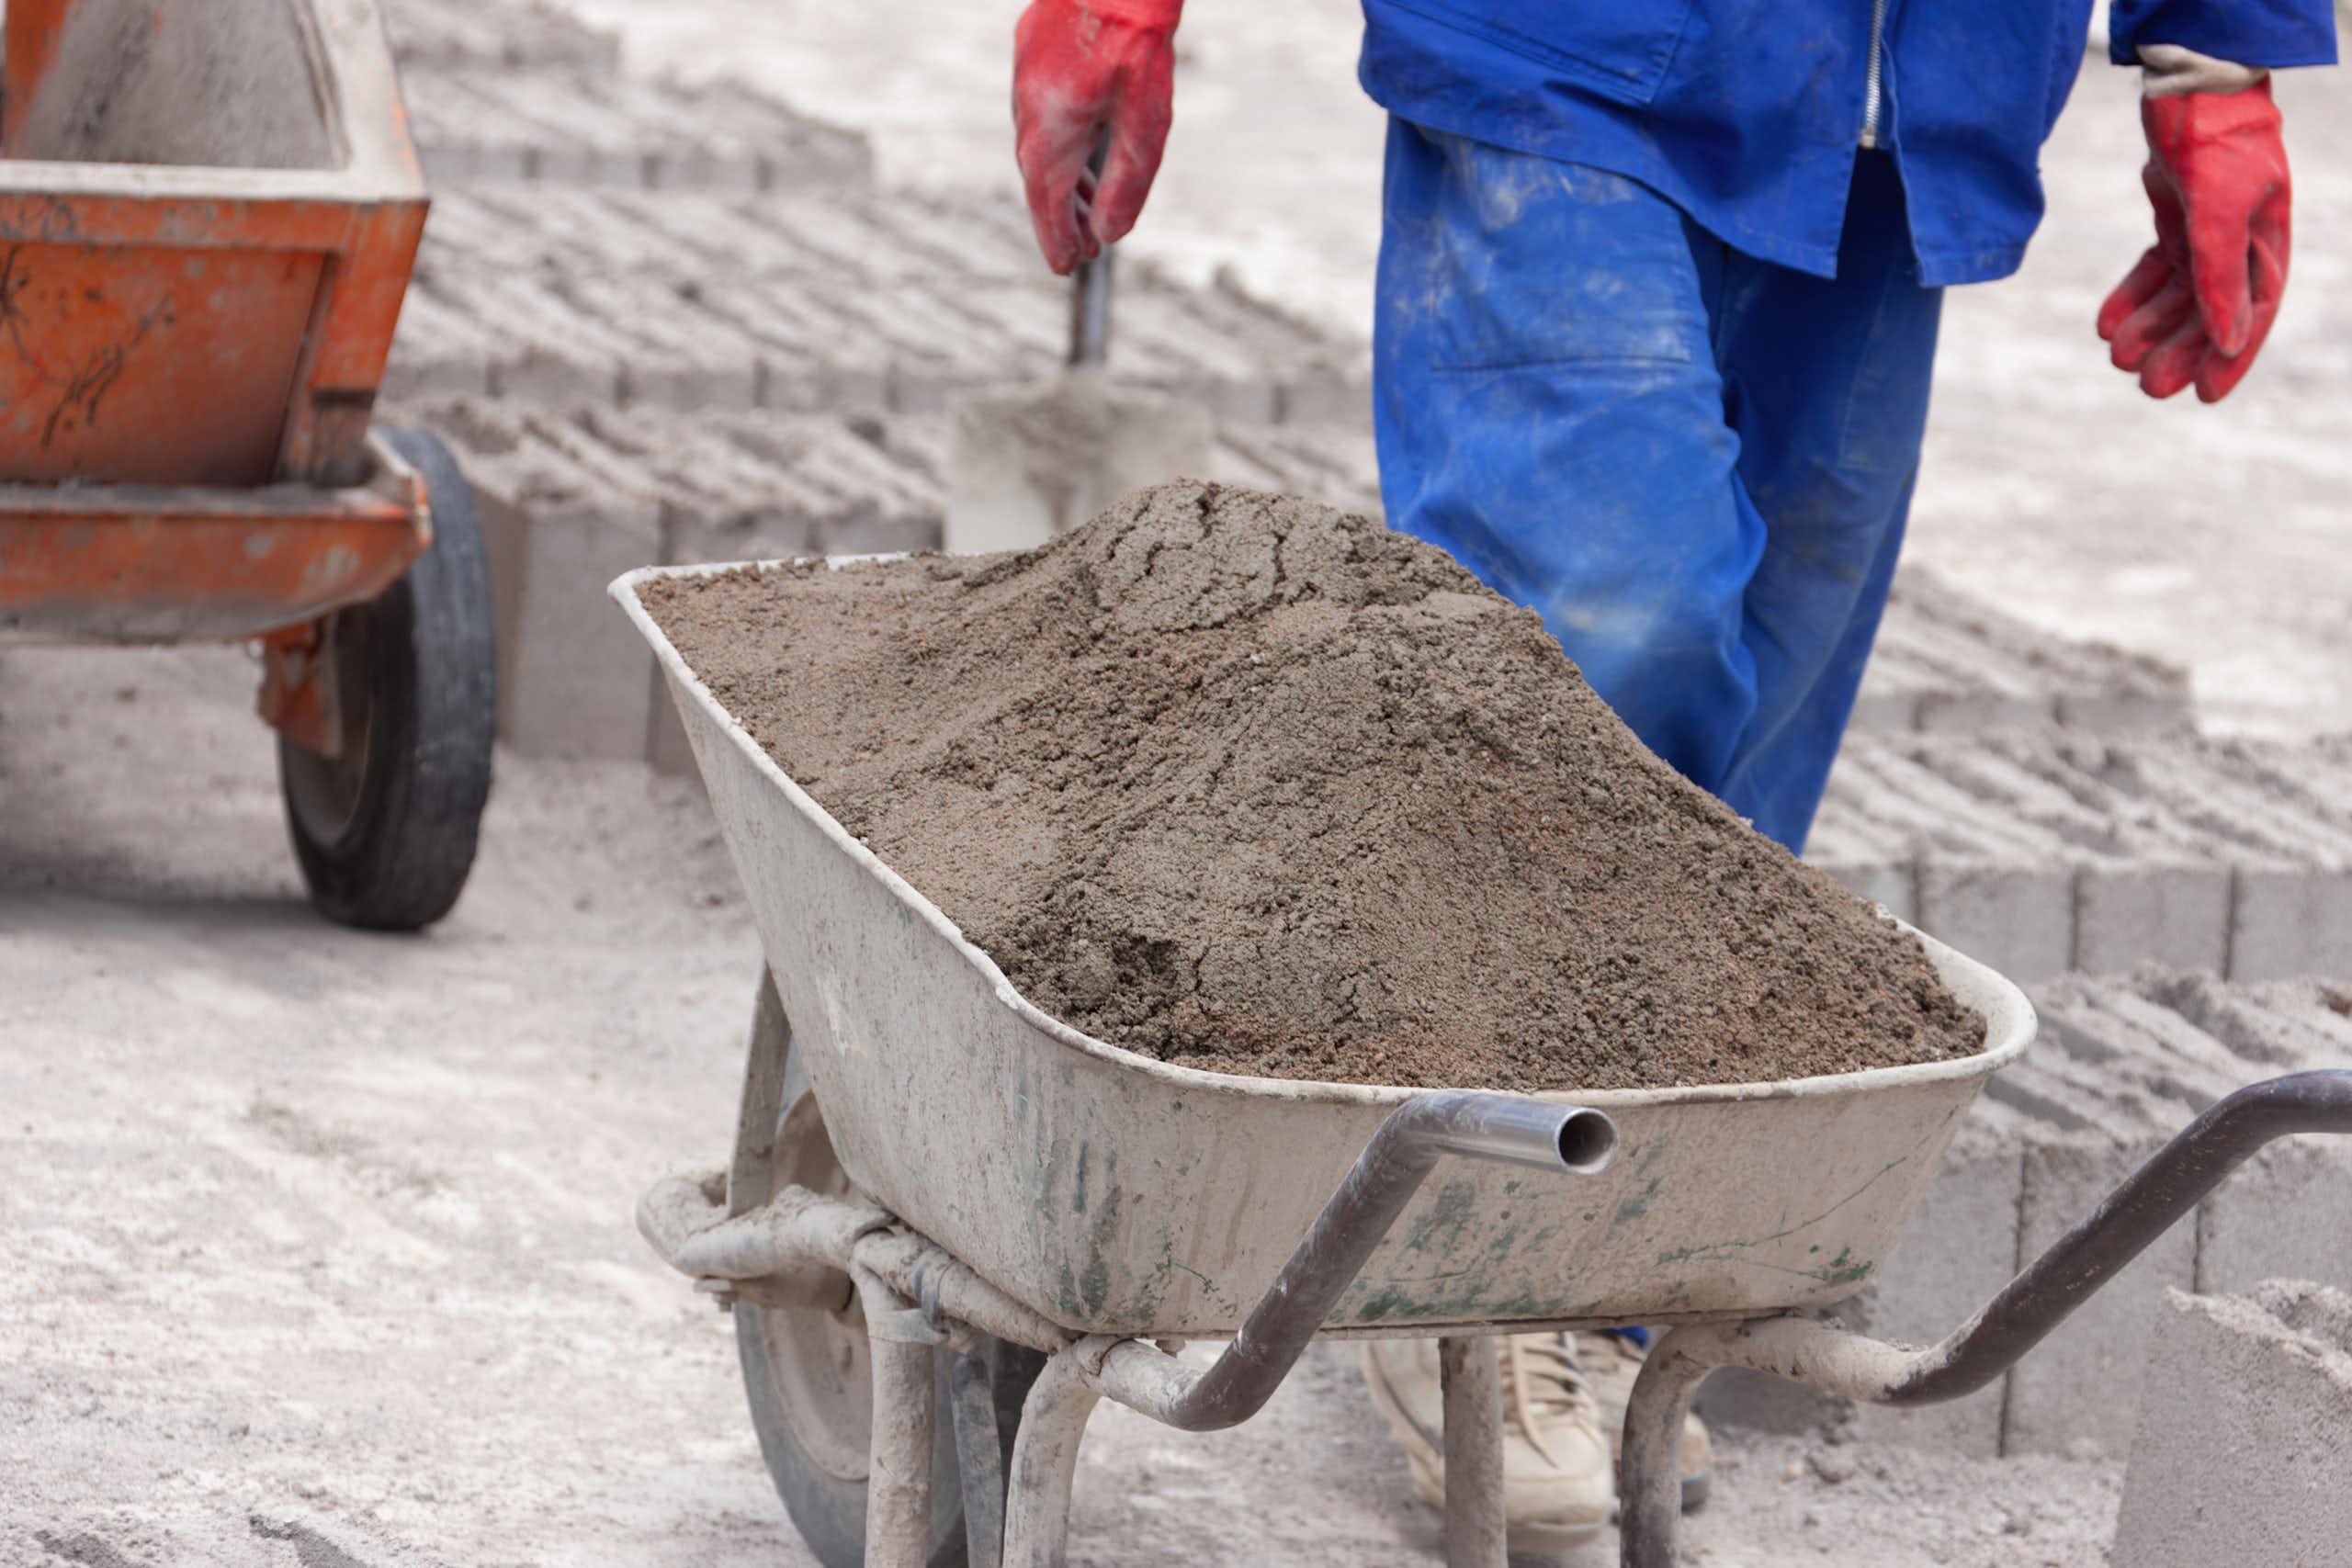 Wheelbarrow of cement and bricks in the background; person wearing work overalls and gloves walking past